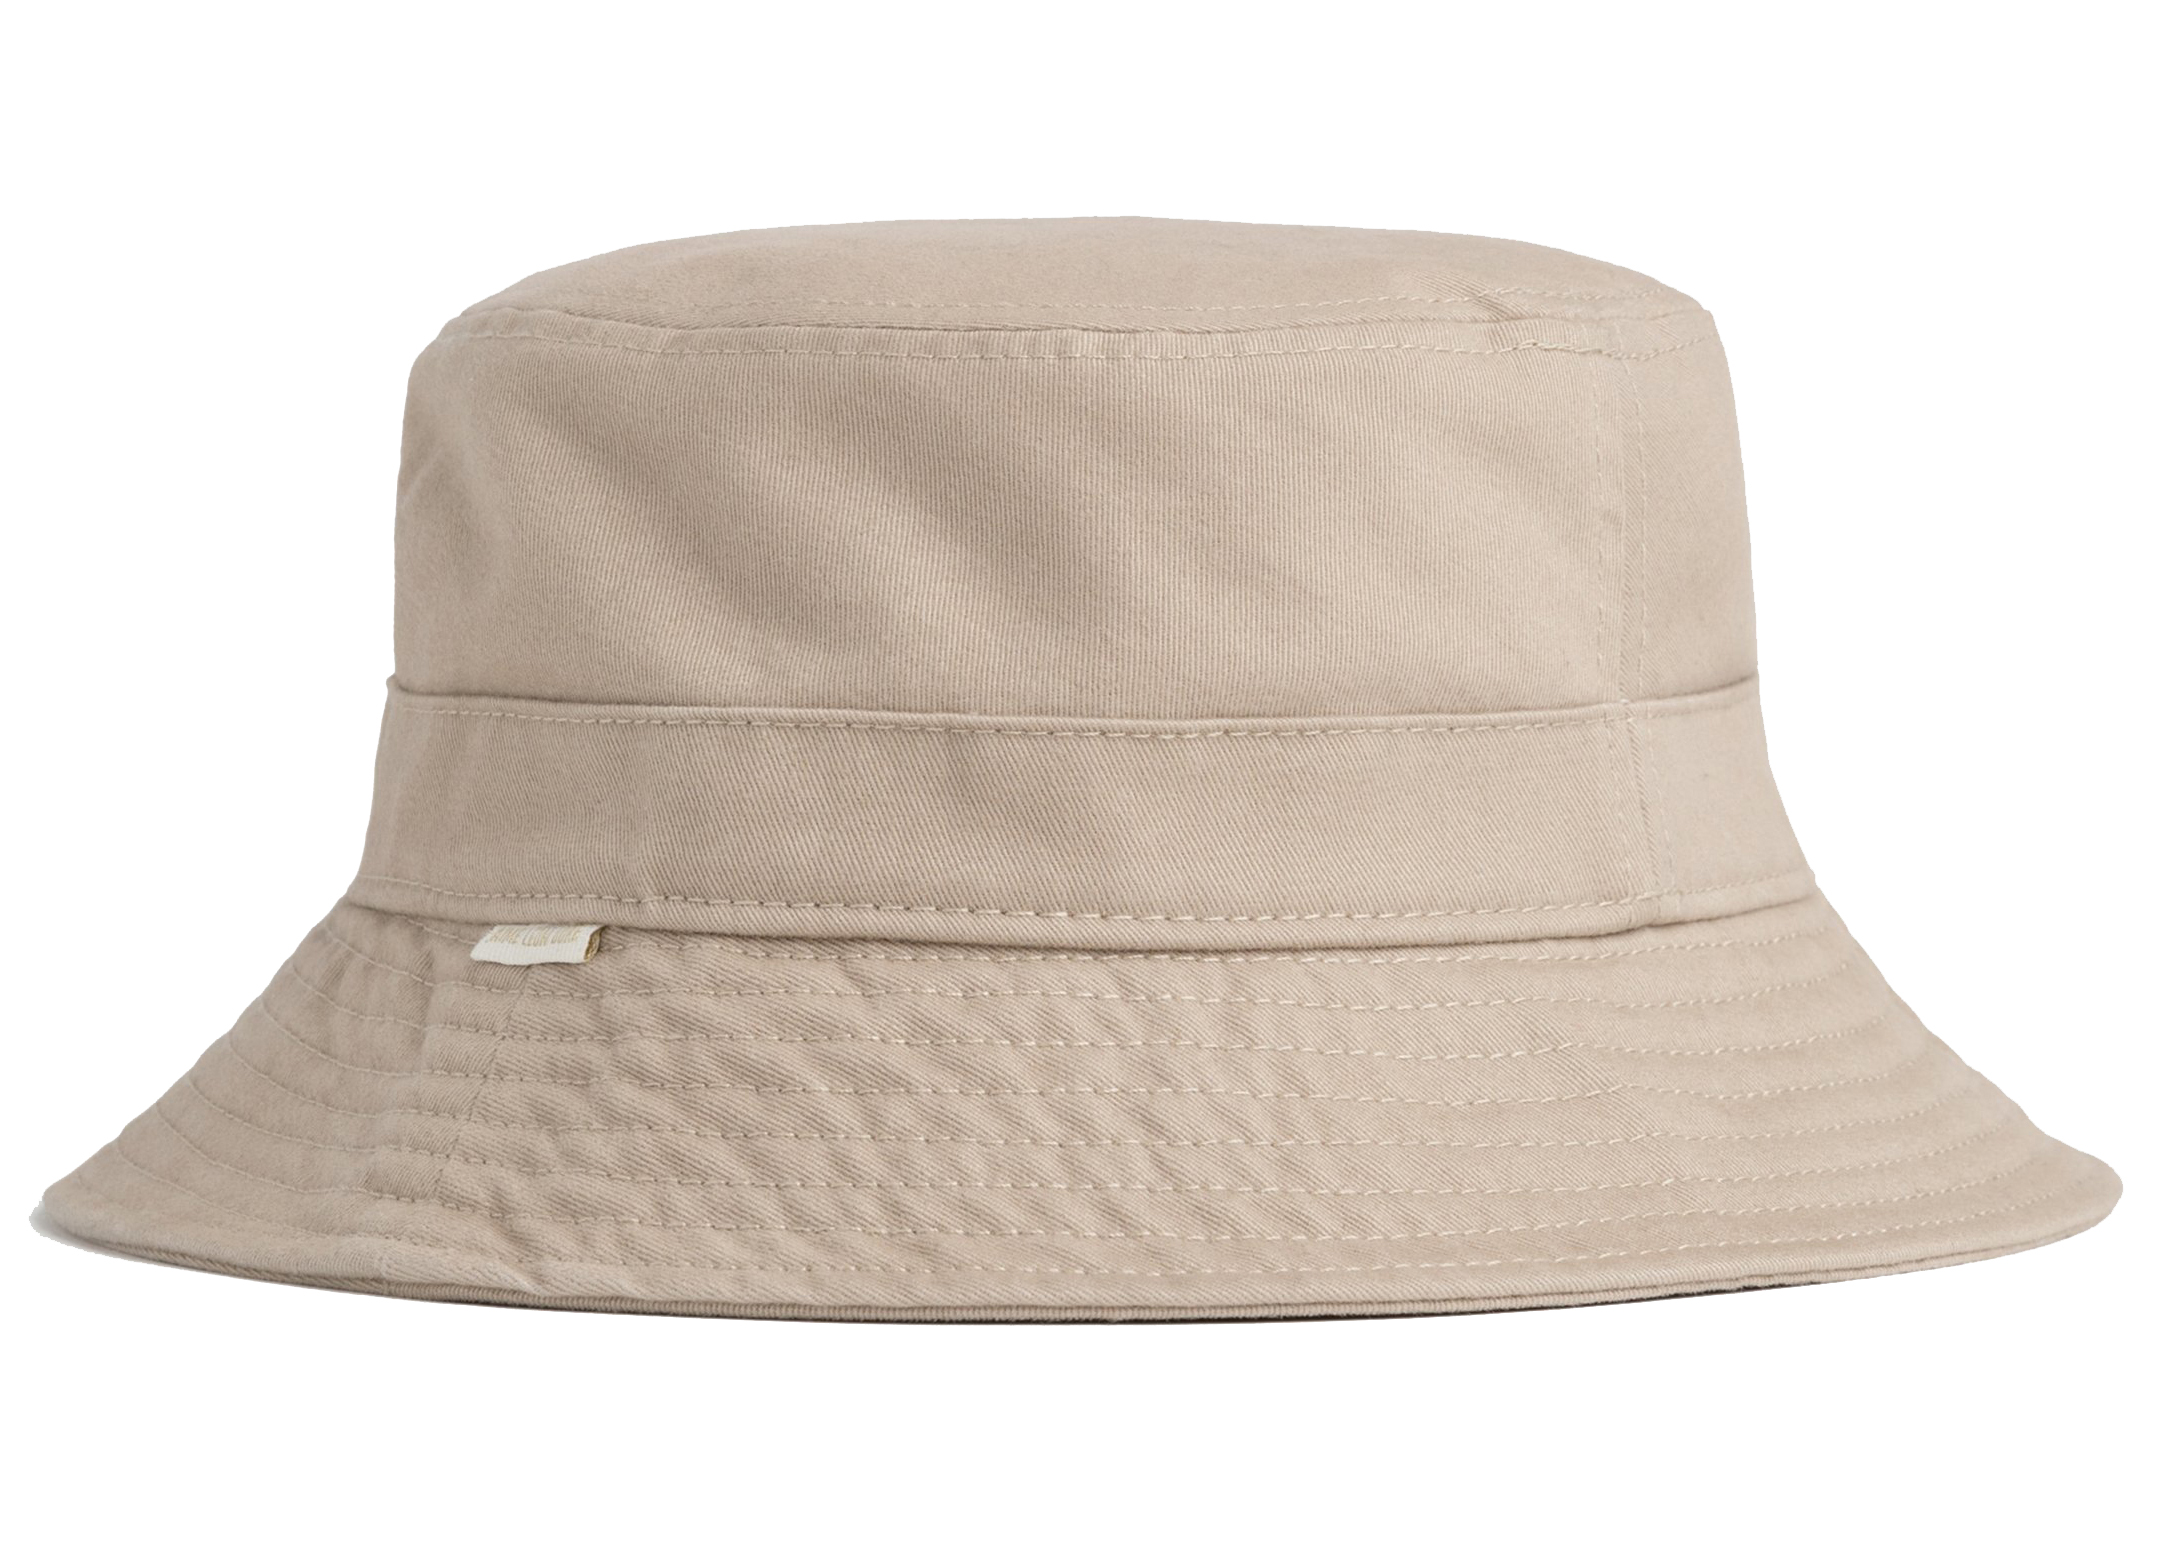 Aime Leon Dore Washed Chino Bucket Hat Tan Men's - SS21 - US